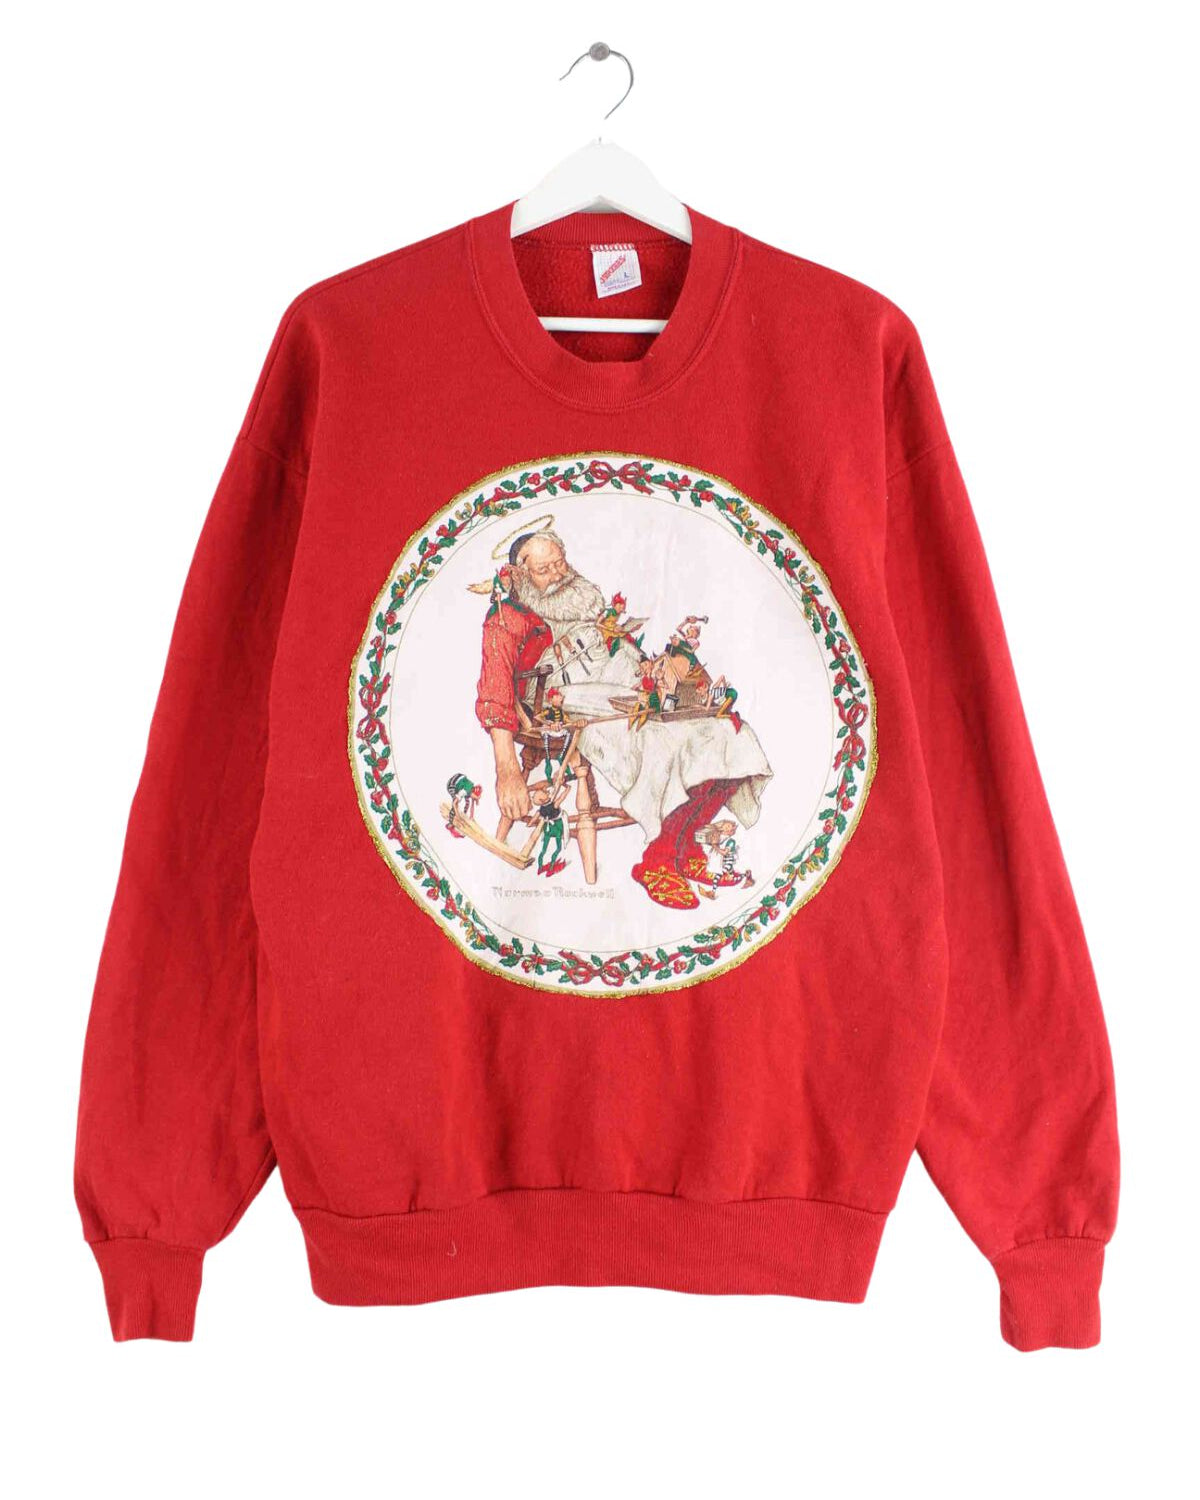 Jerzees 90s Vintage Santa Embroidered Sweater Rot L (front image)